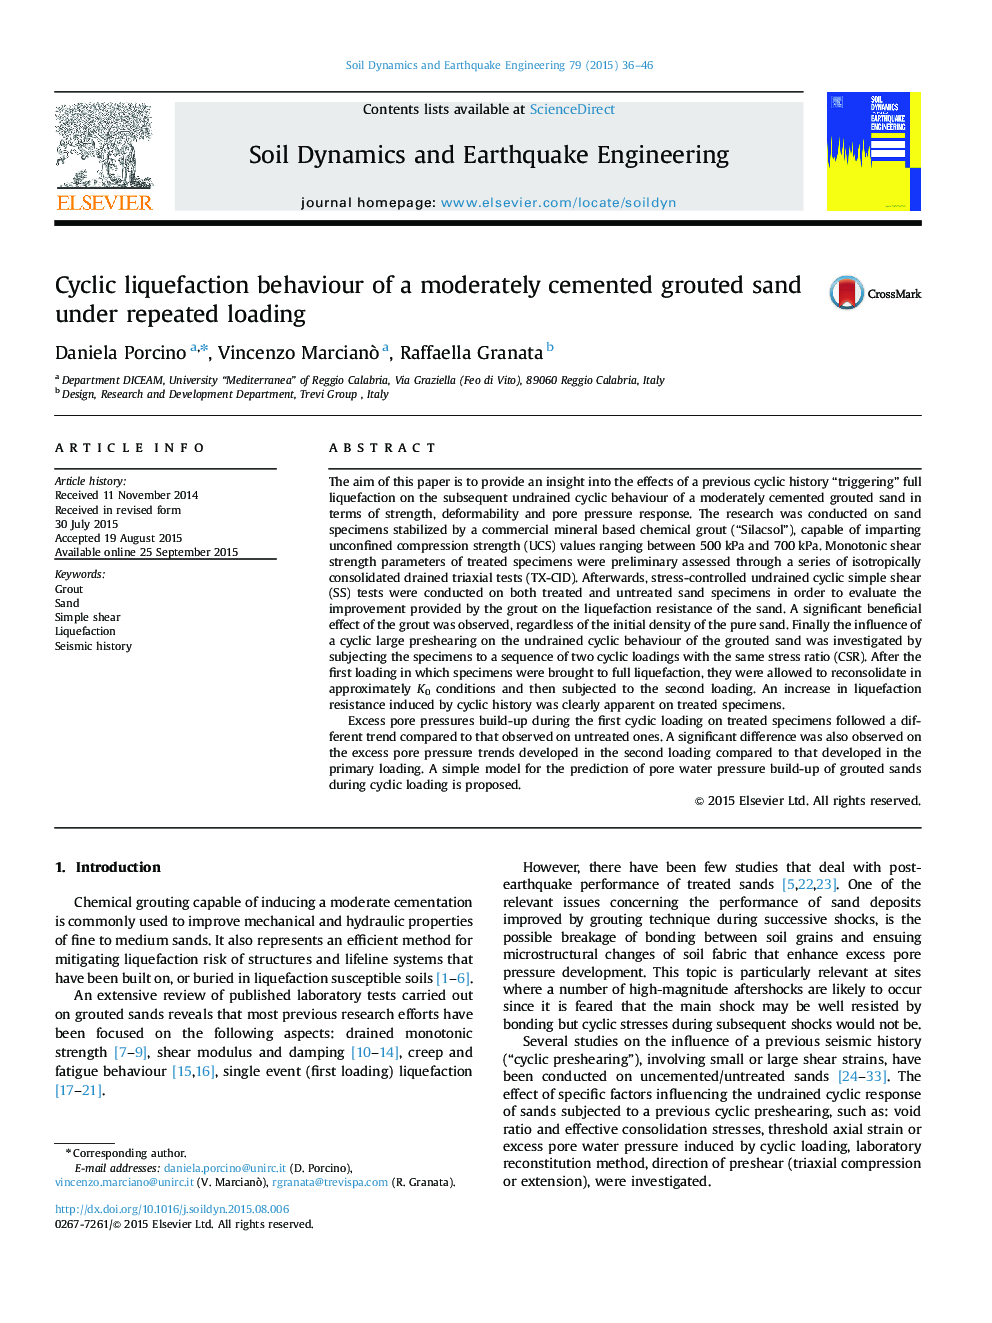 Cyclic liquefaction behaviour of a moderately cemented grouted sand under repeated loading